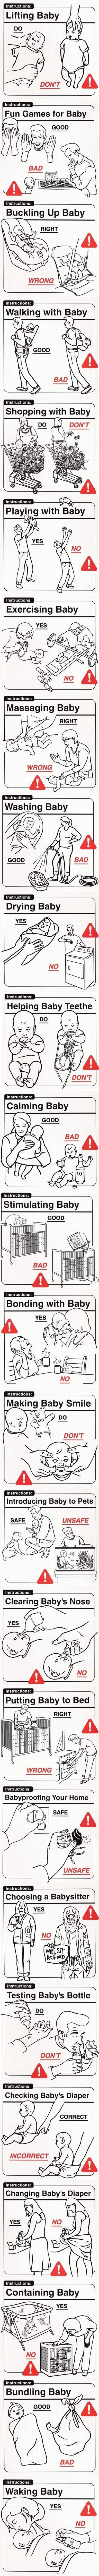 how to caring baby. .